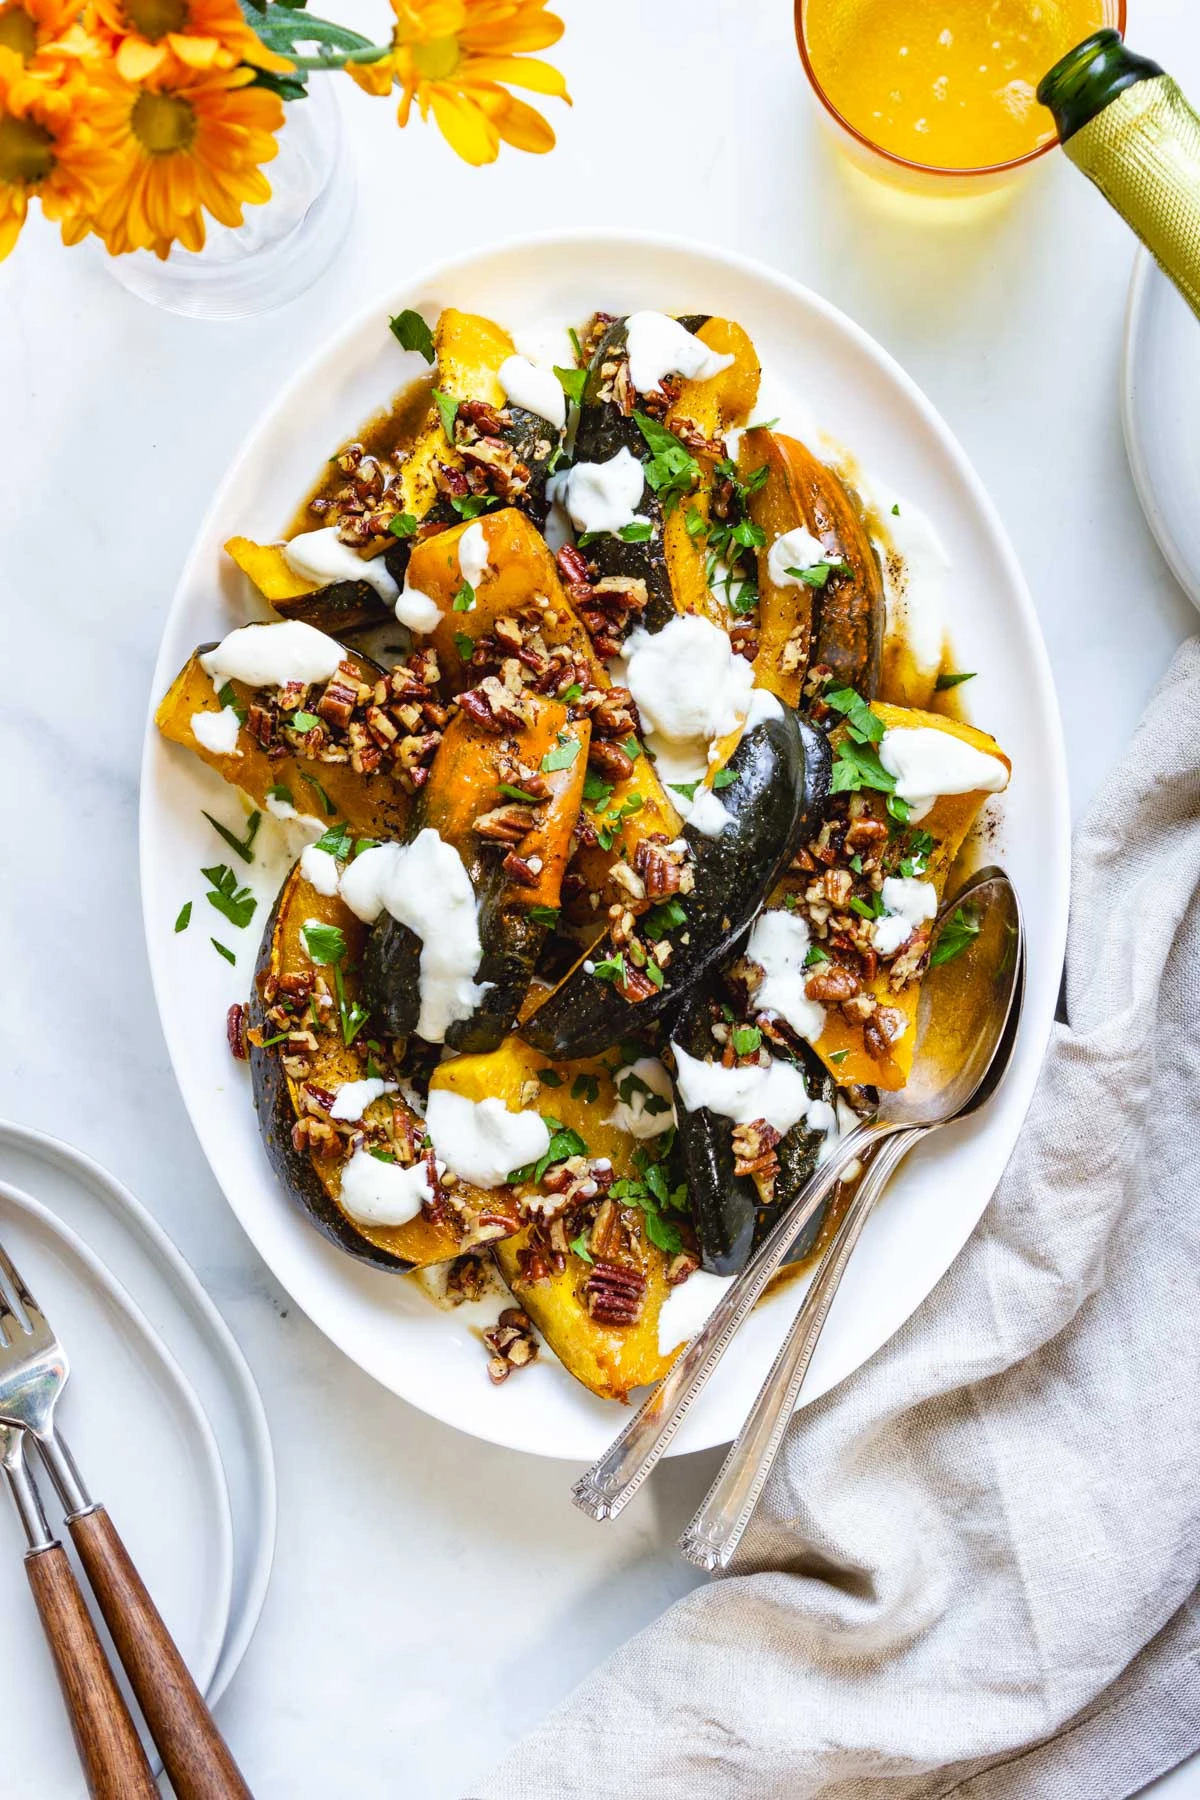 Roasted Acorn Squash with Yogurt, Pecans, & Browned Butter